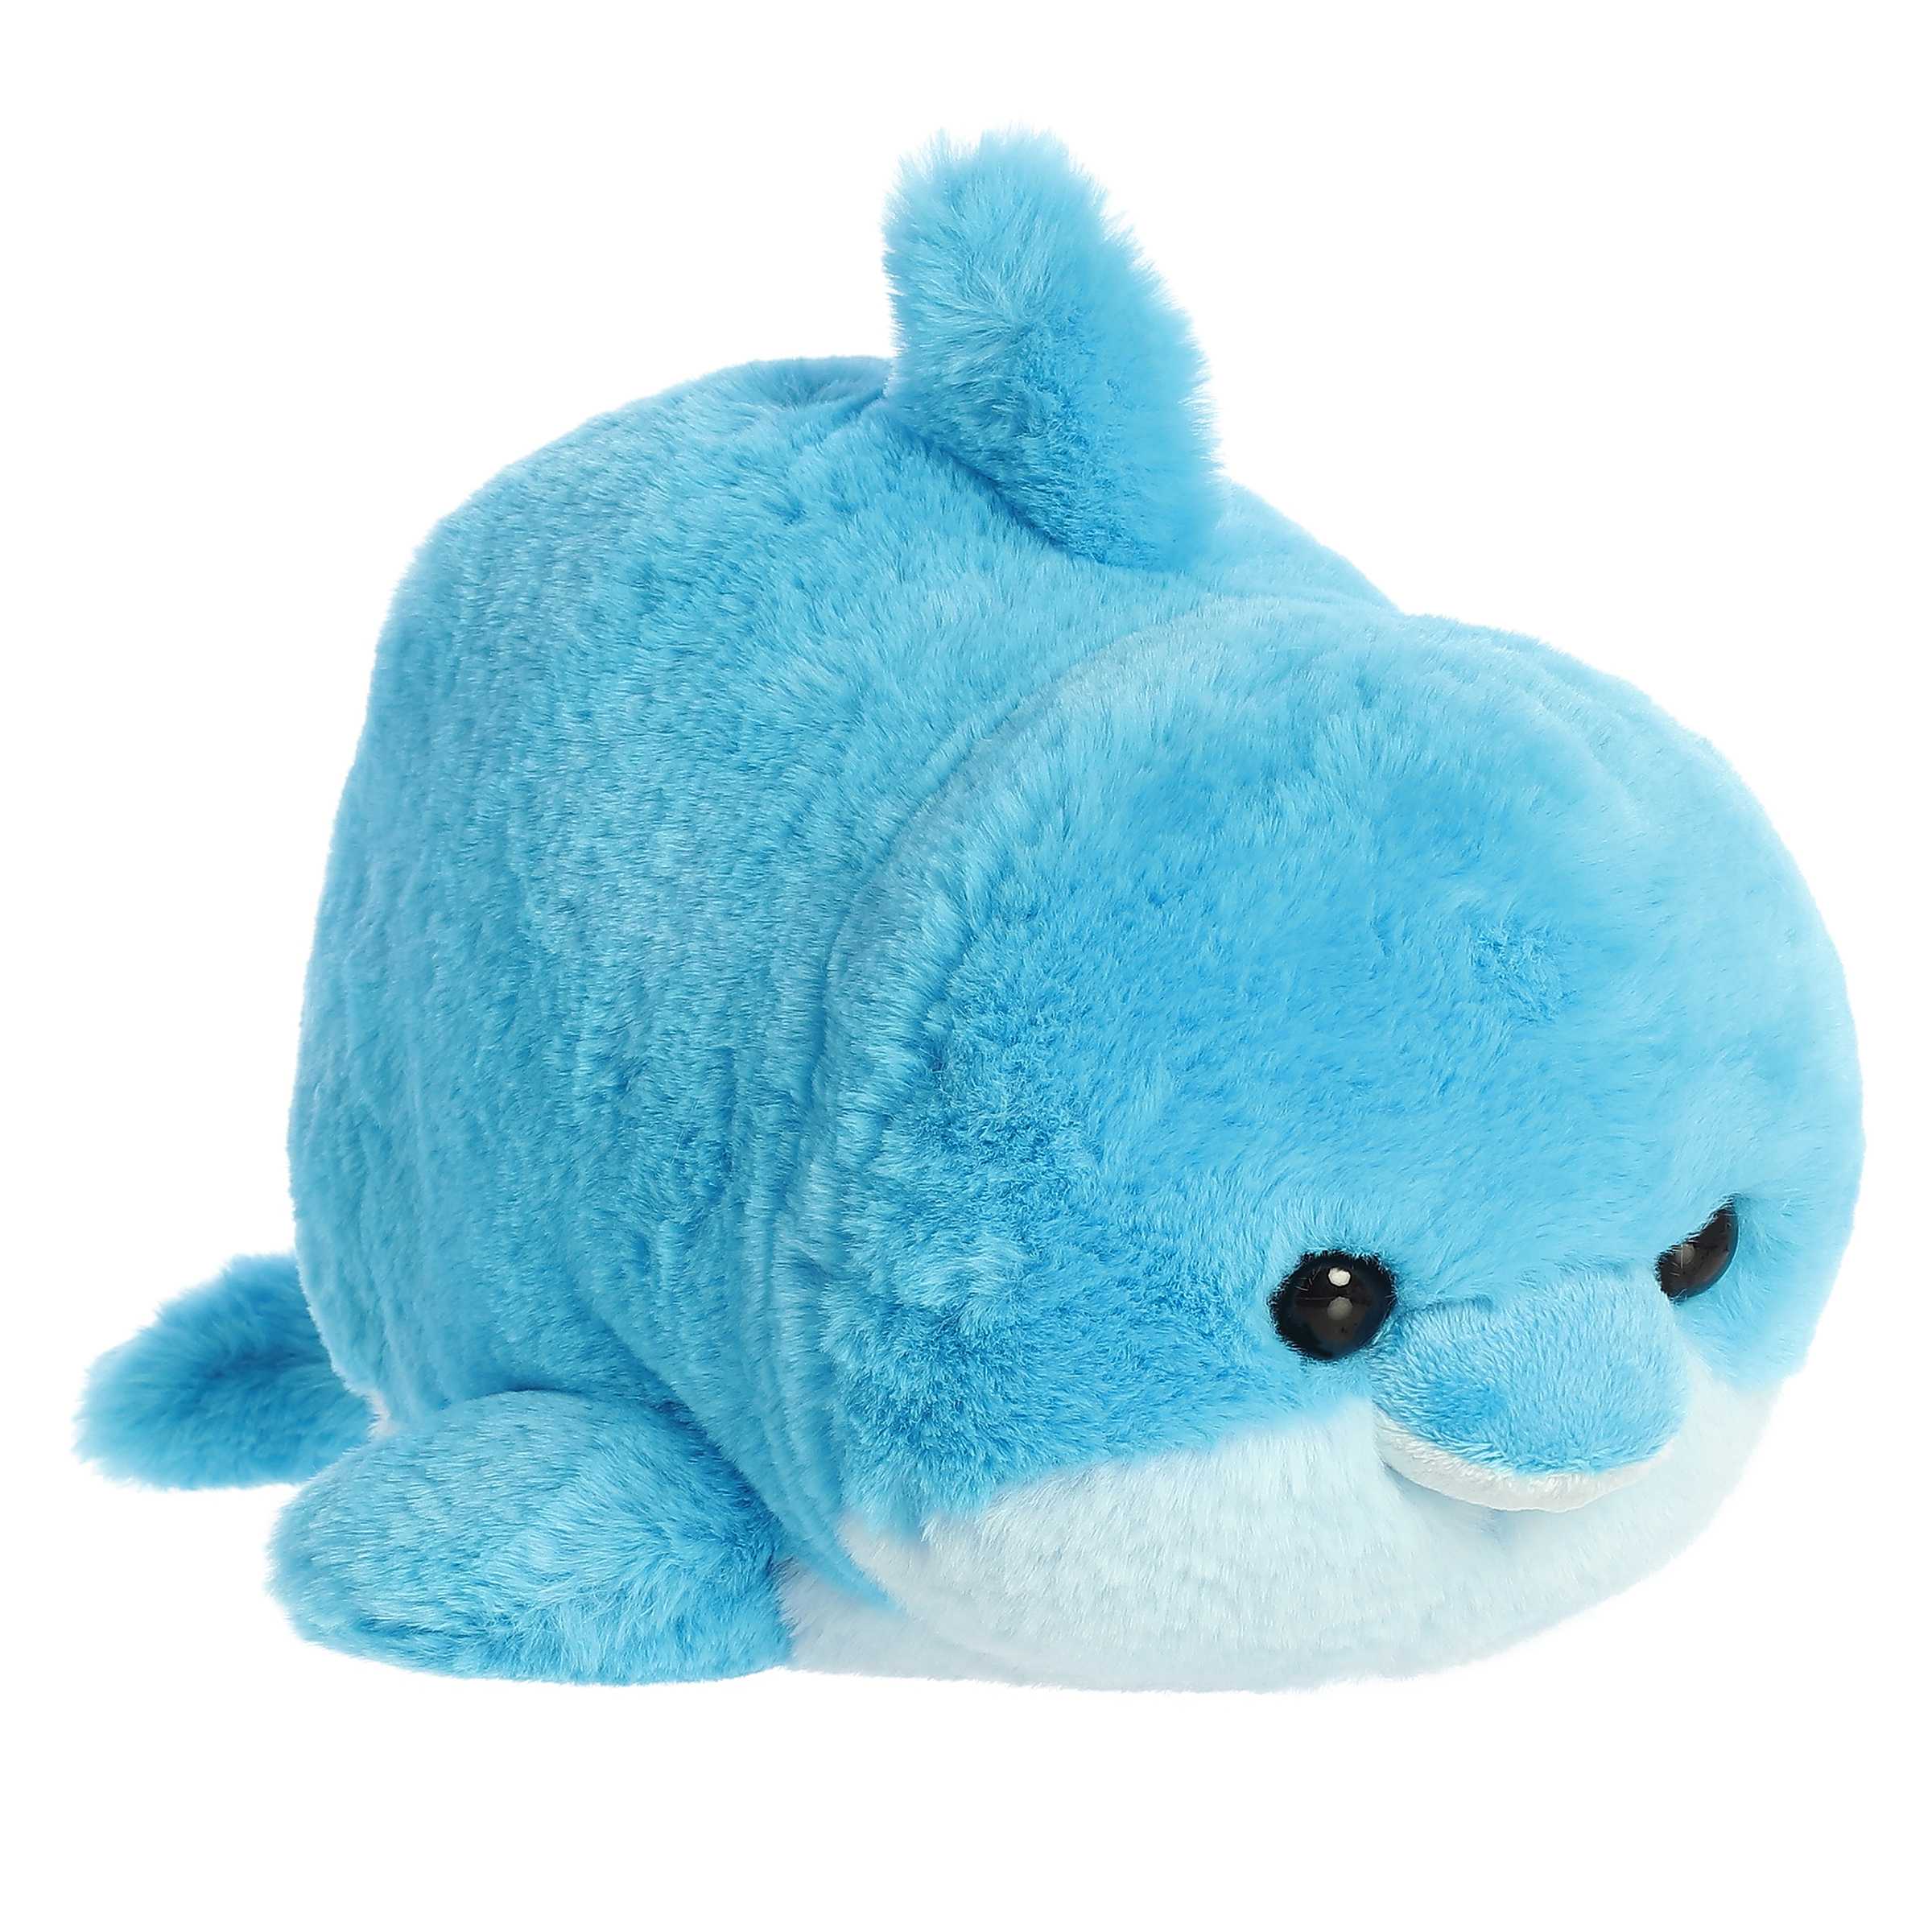 Dilly Dolphin from Spudsters, a vibrant blue potato-shaped plush with a friendly smile